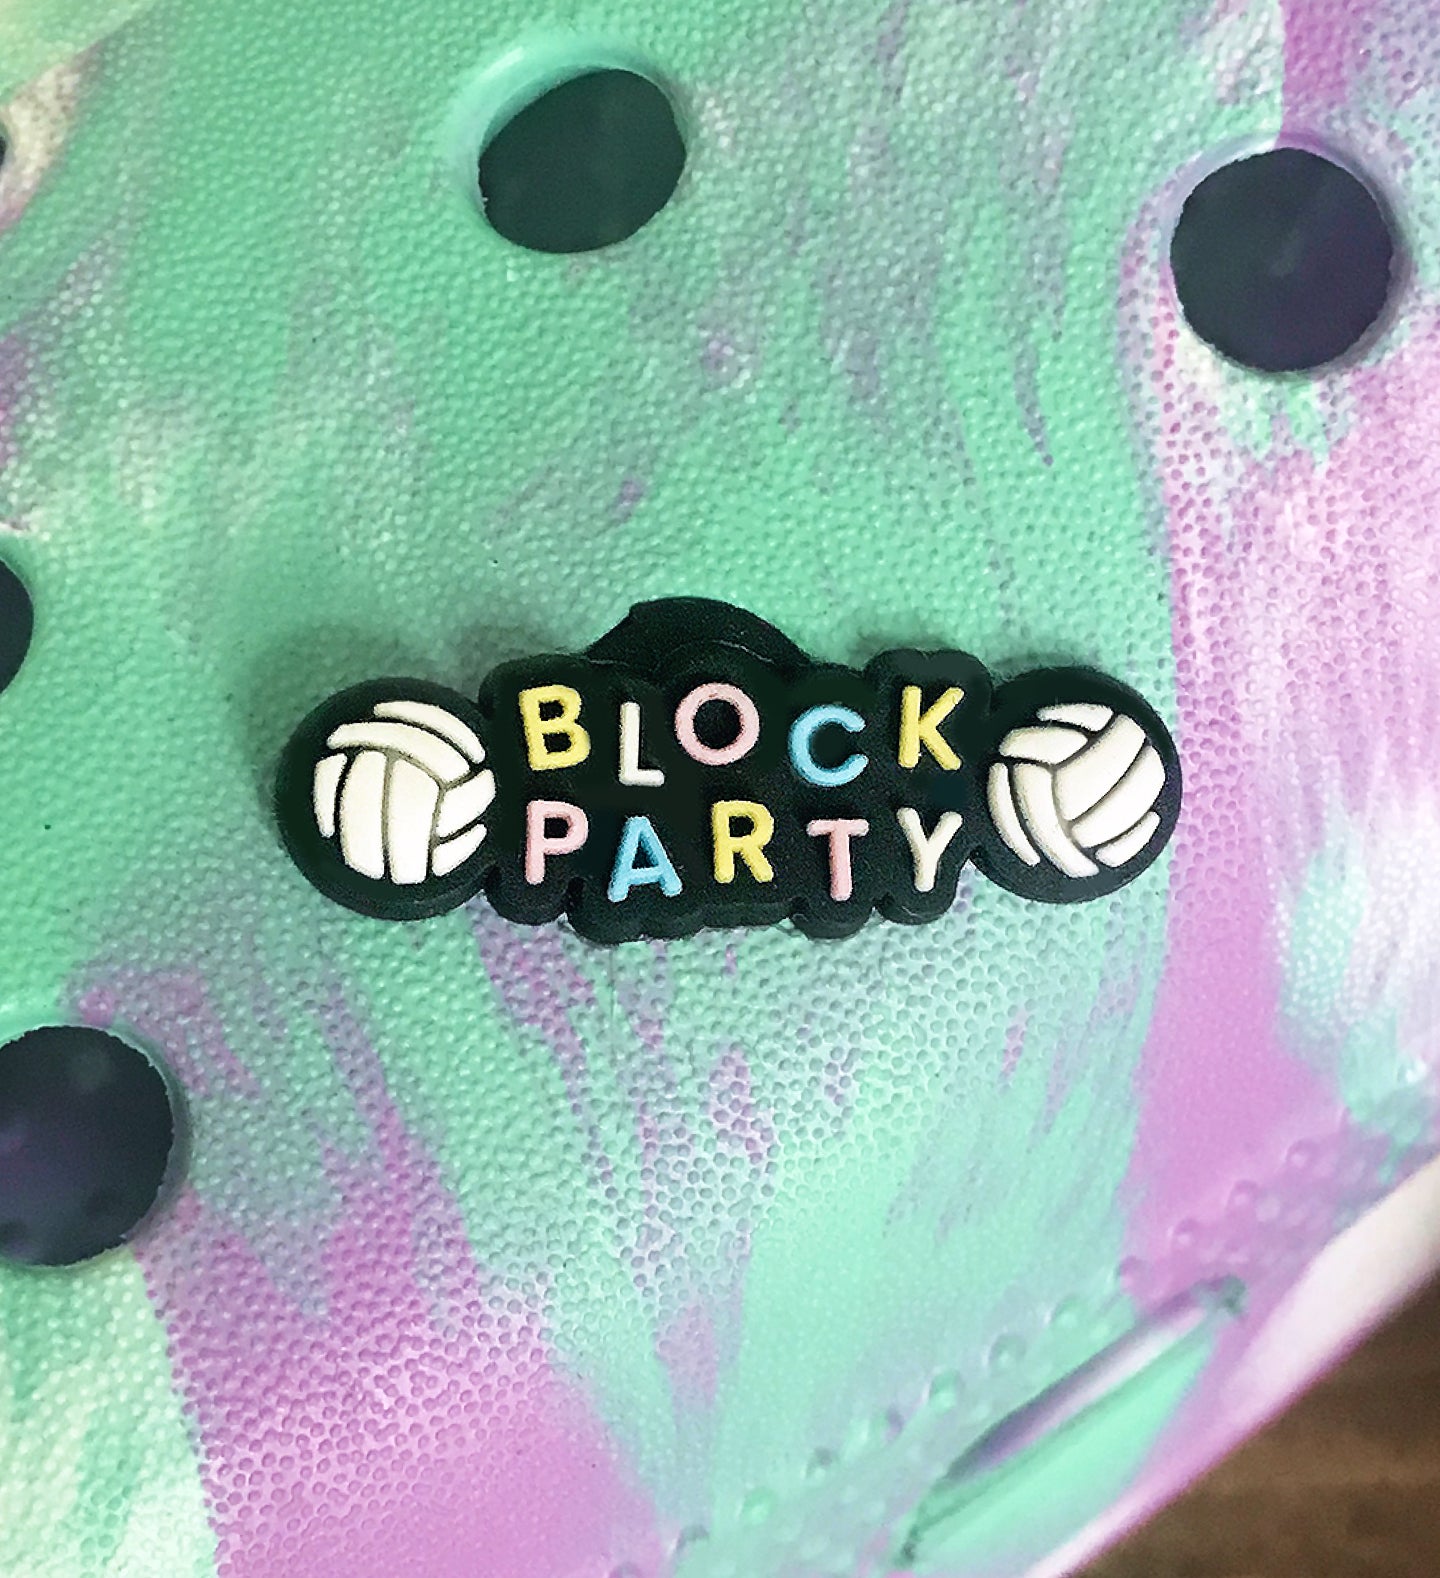 Block Party - Volleyball Shoe Charm